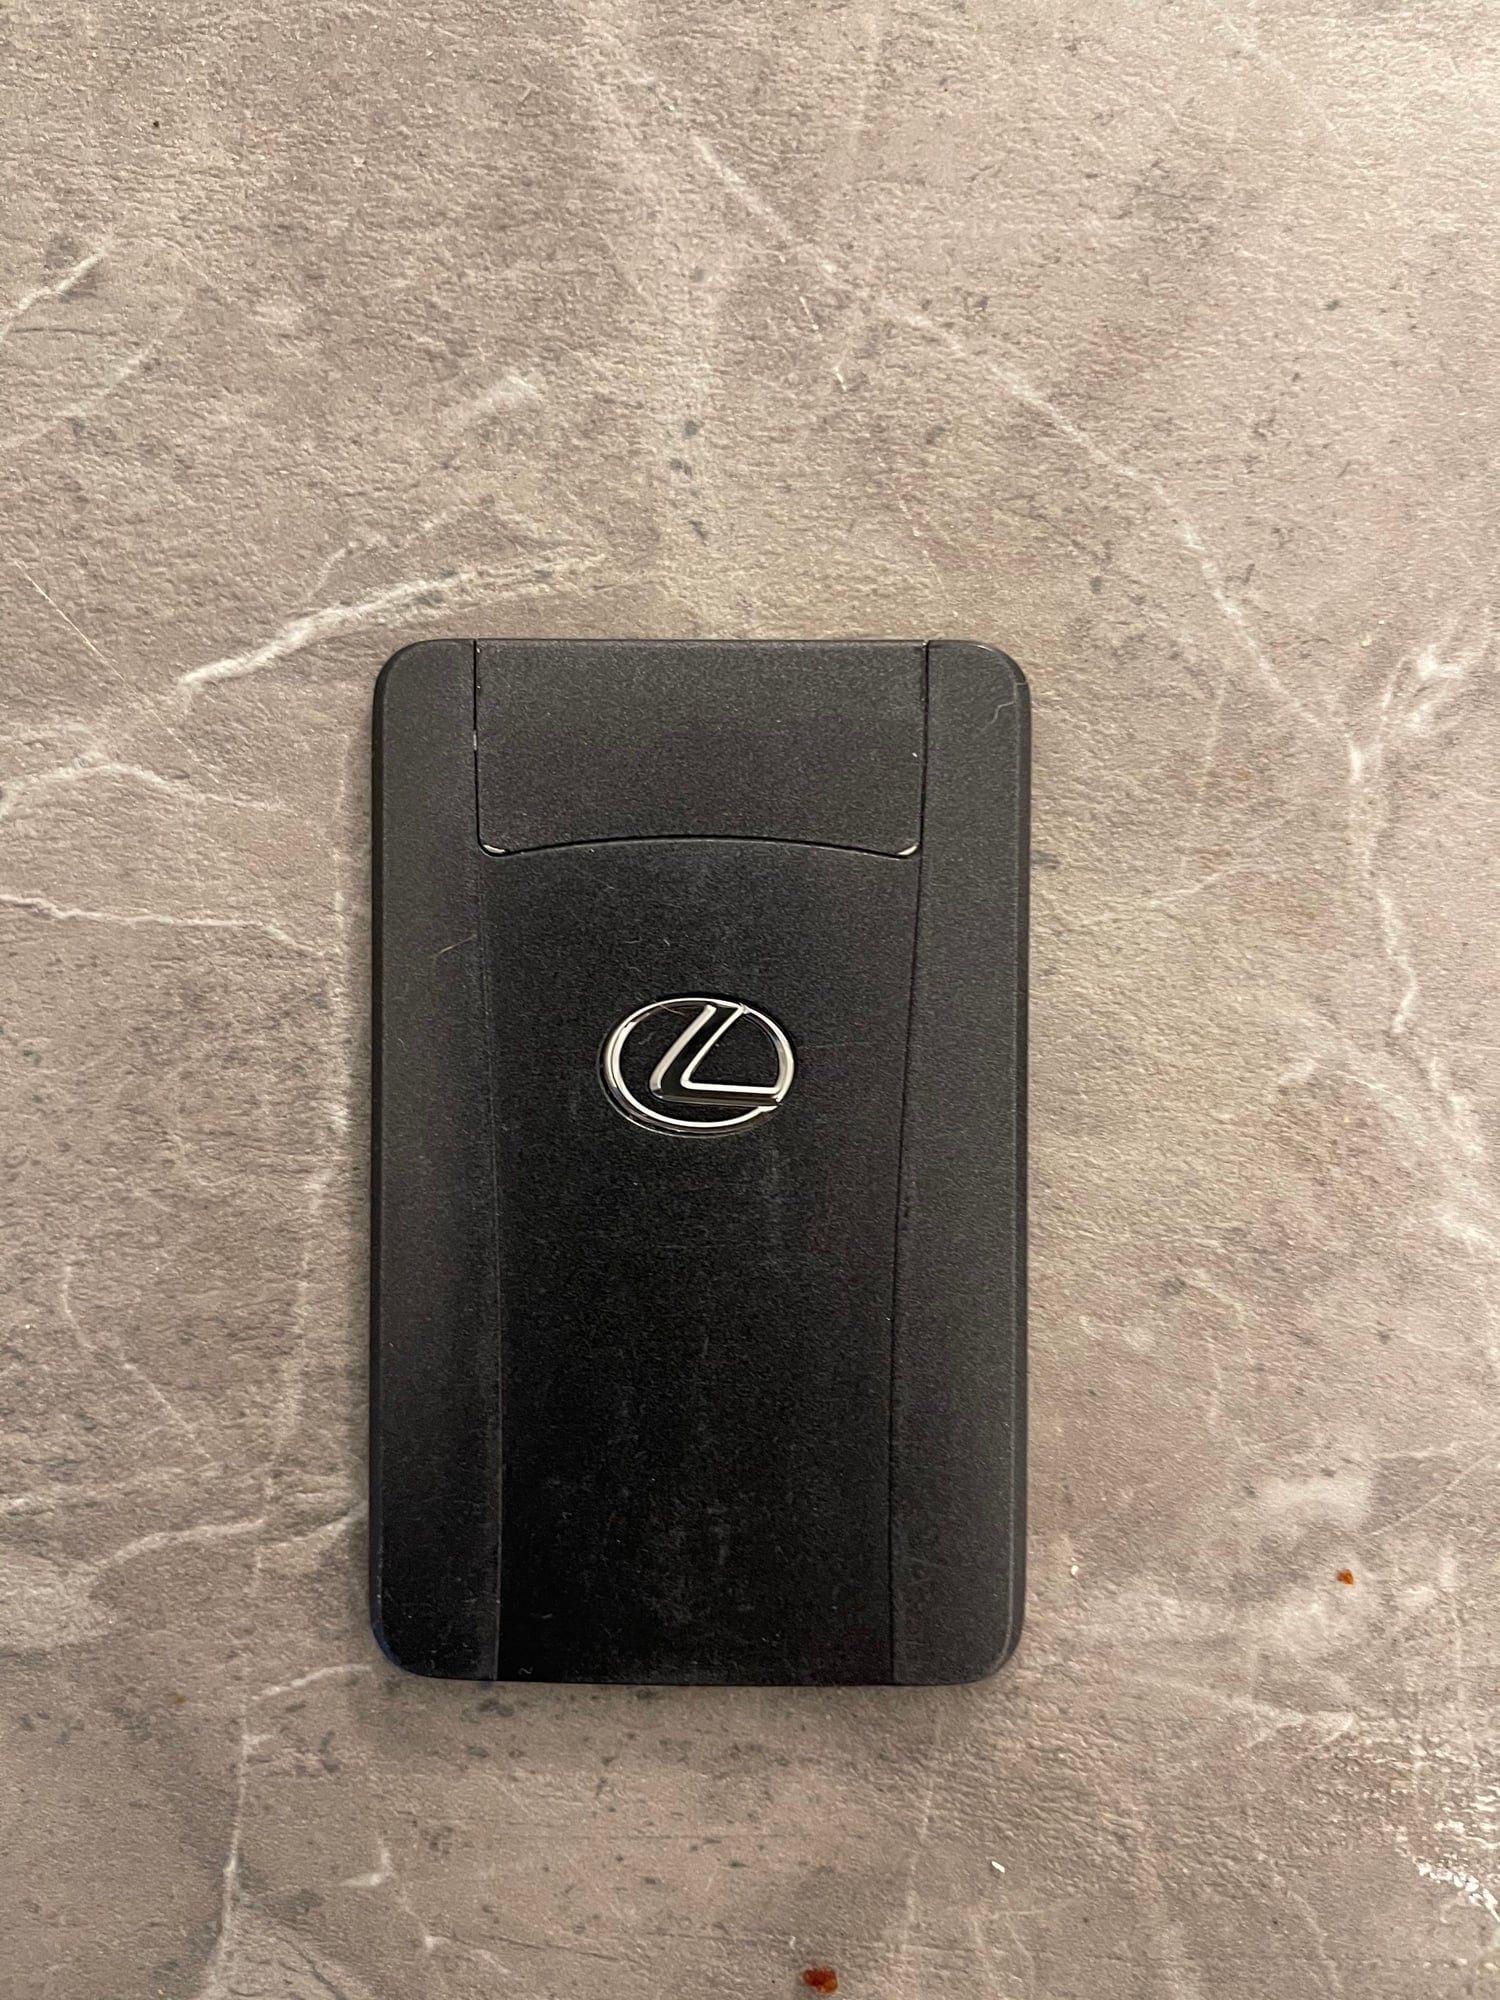 Accessories - Lexus smart credit card key - Used - 2010 to 2014 Lexus RX350 - Montreal, QC H4A, Canada